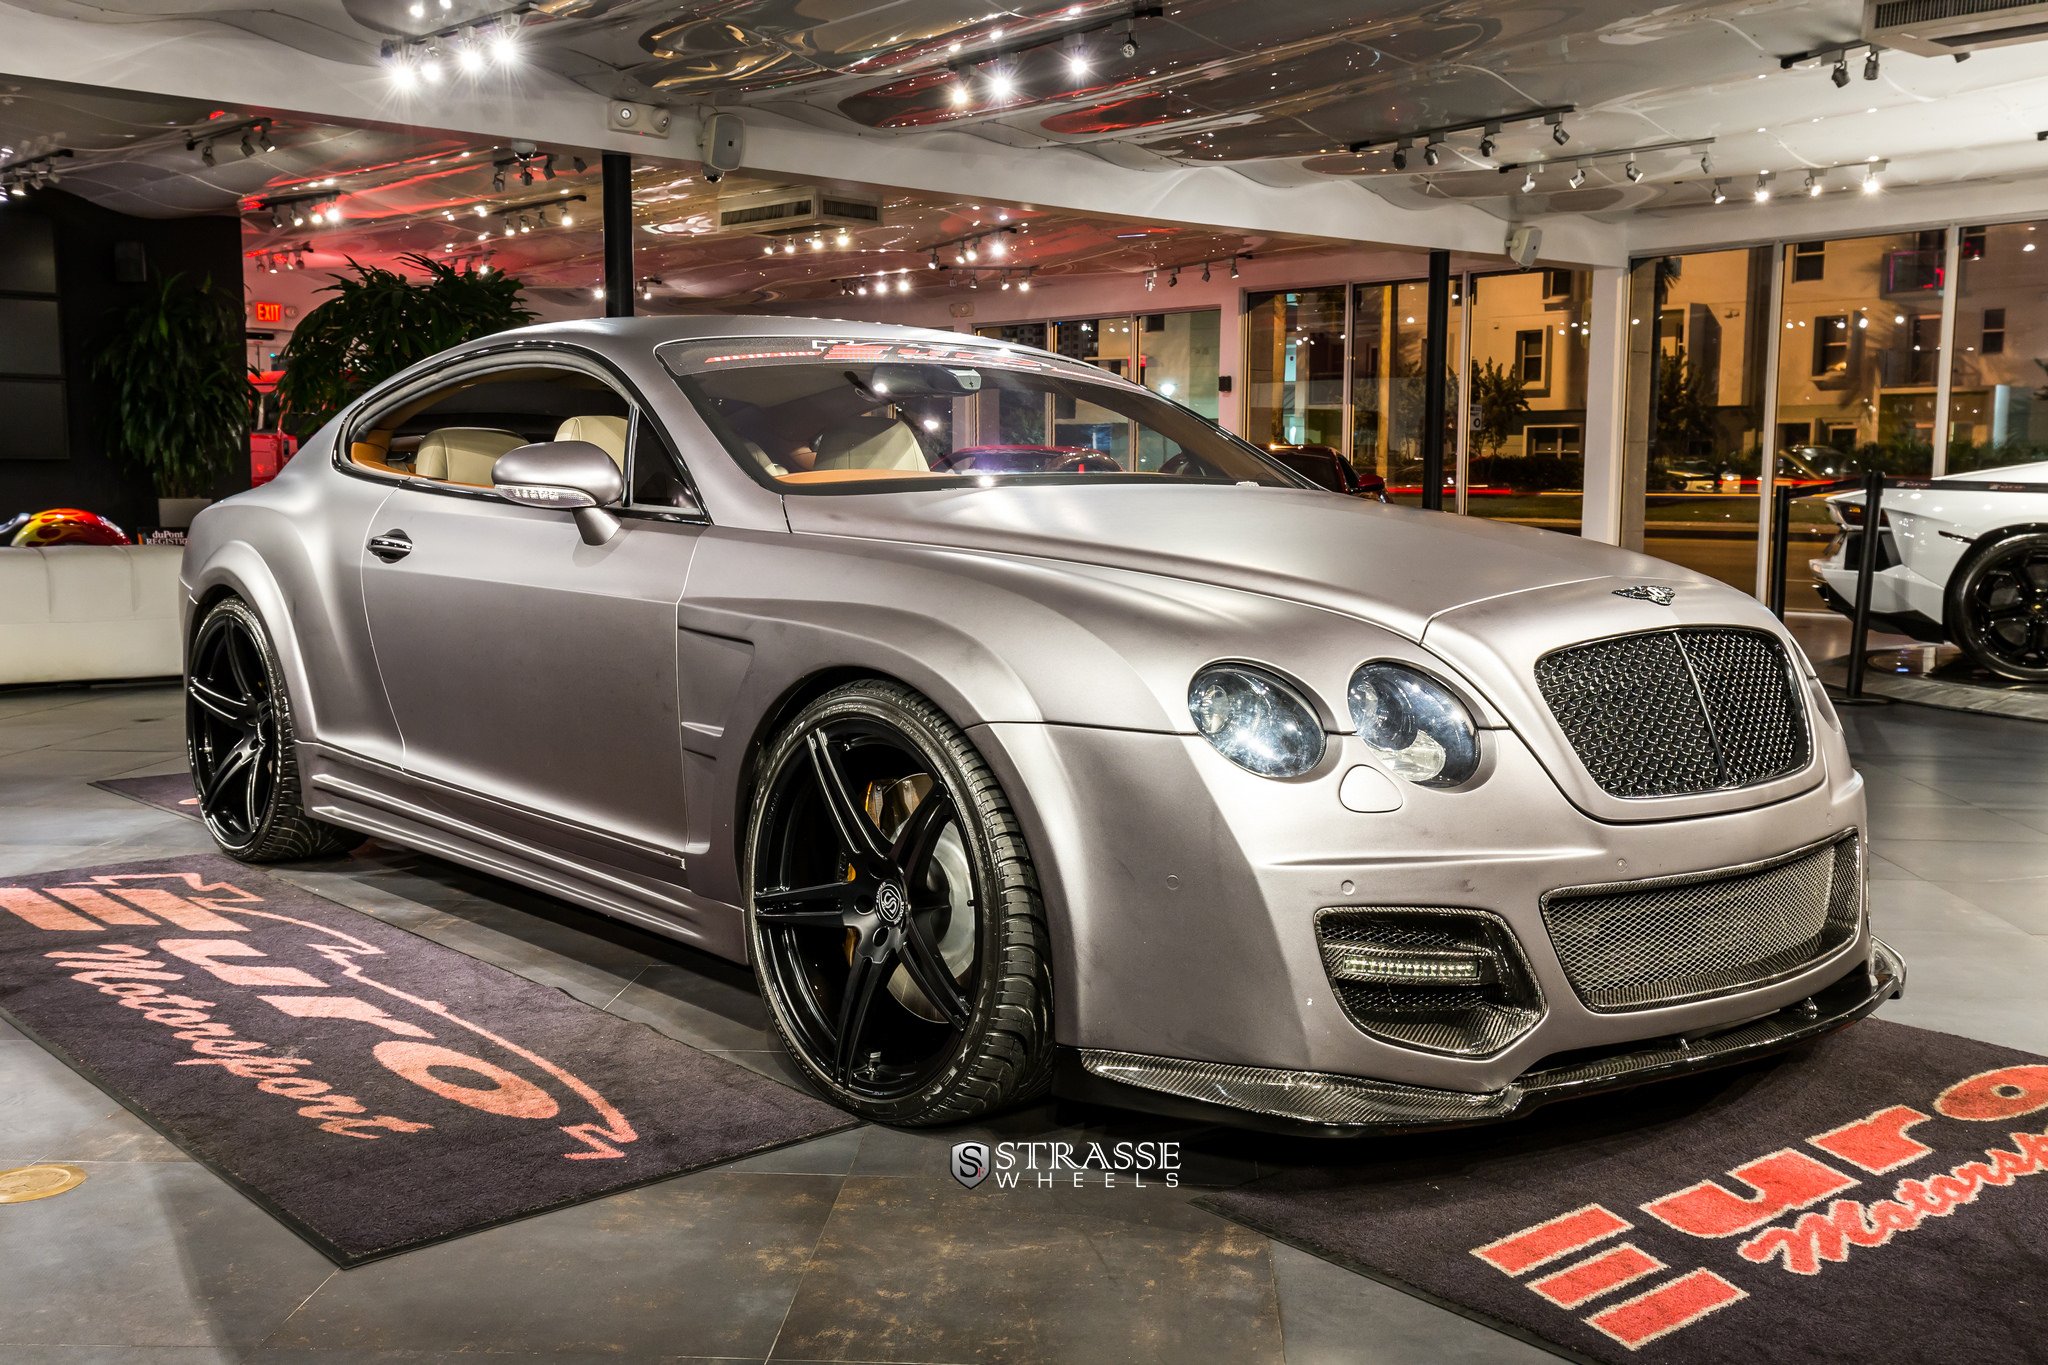 strasse, Wheels, Wide, Body, Bentley gt, Continental, Coupe, Cars Wallpaper